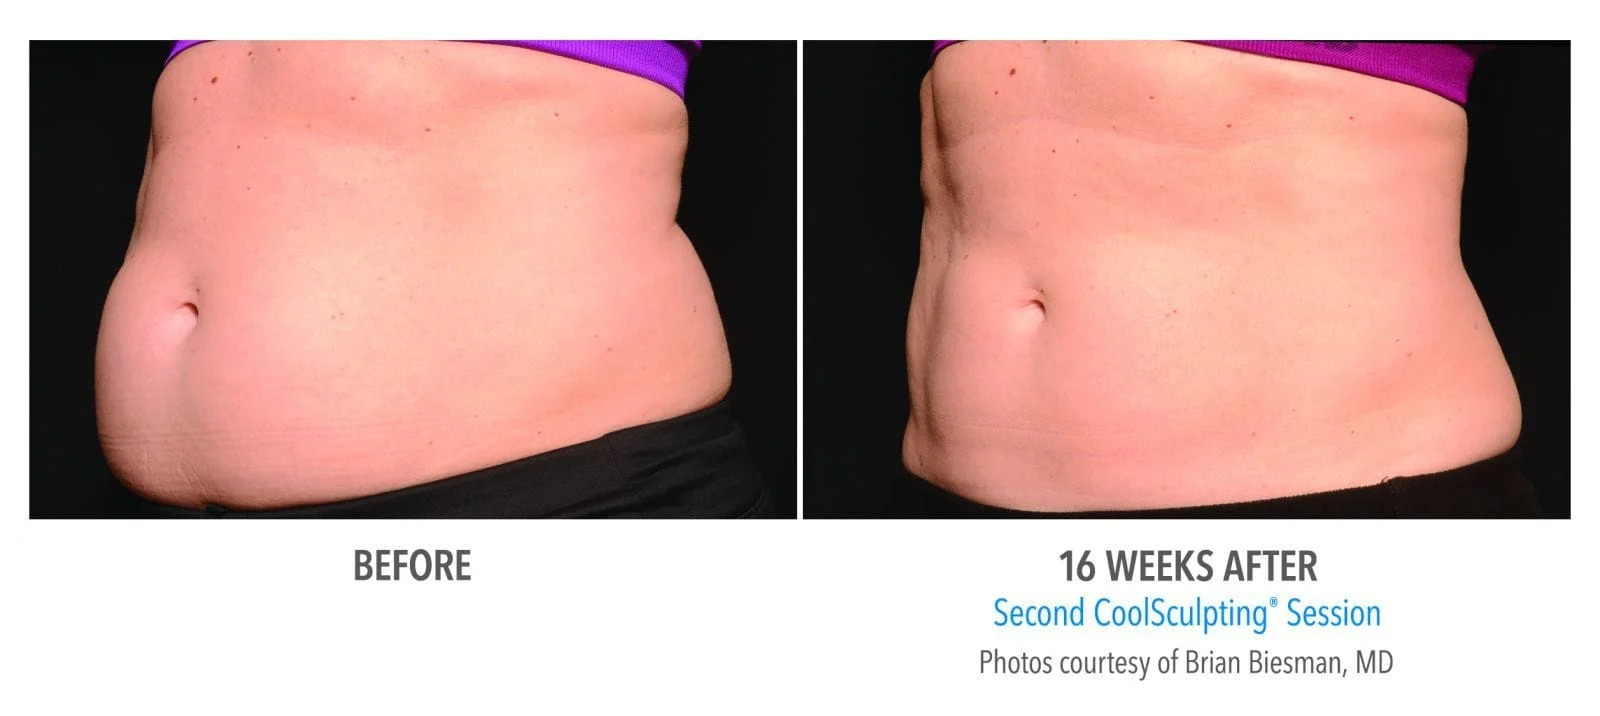 CoolSculpting: The Secret To Snapping Back After Baby